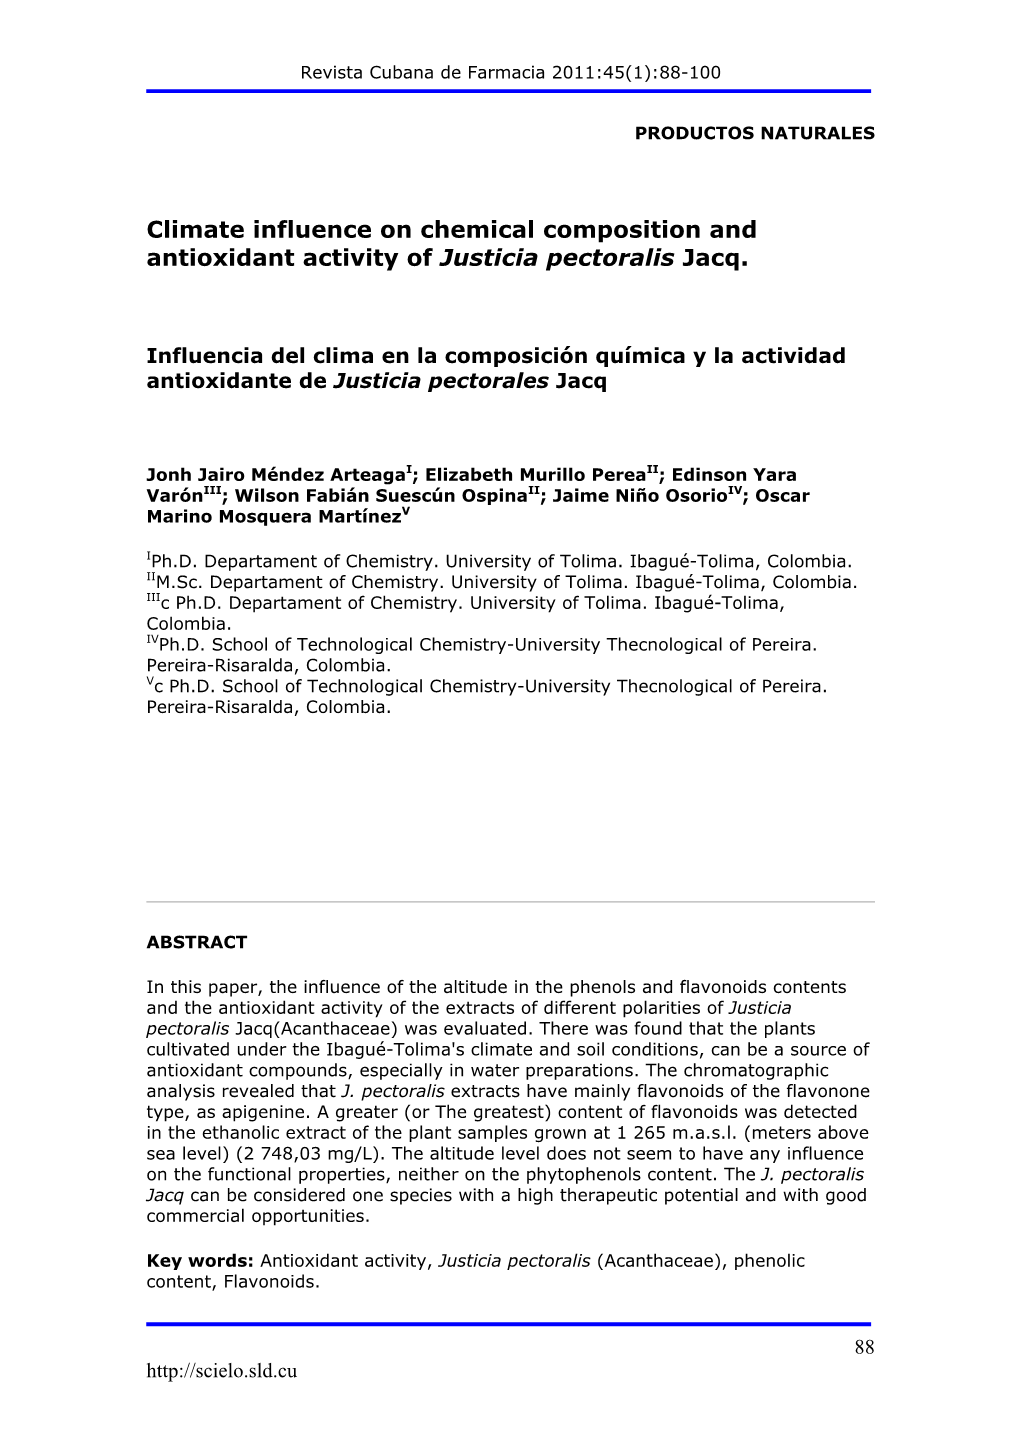 Climate Influence on Chemical Composition and Antioxidant Activity of Justicia Pectoralis Jacq